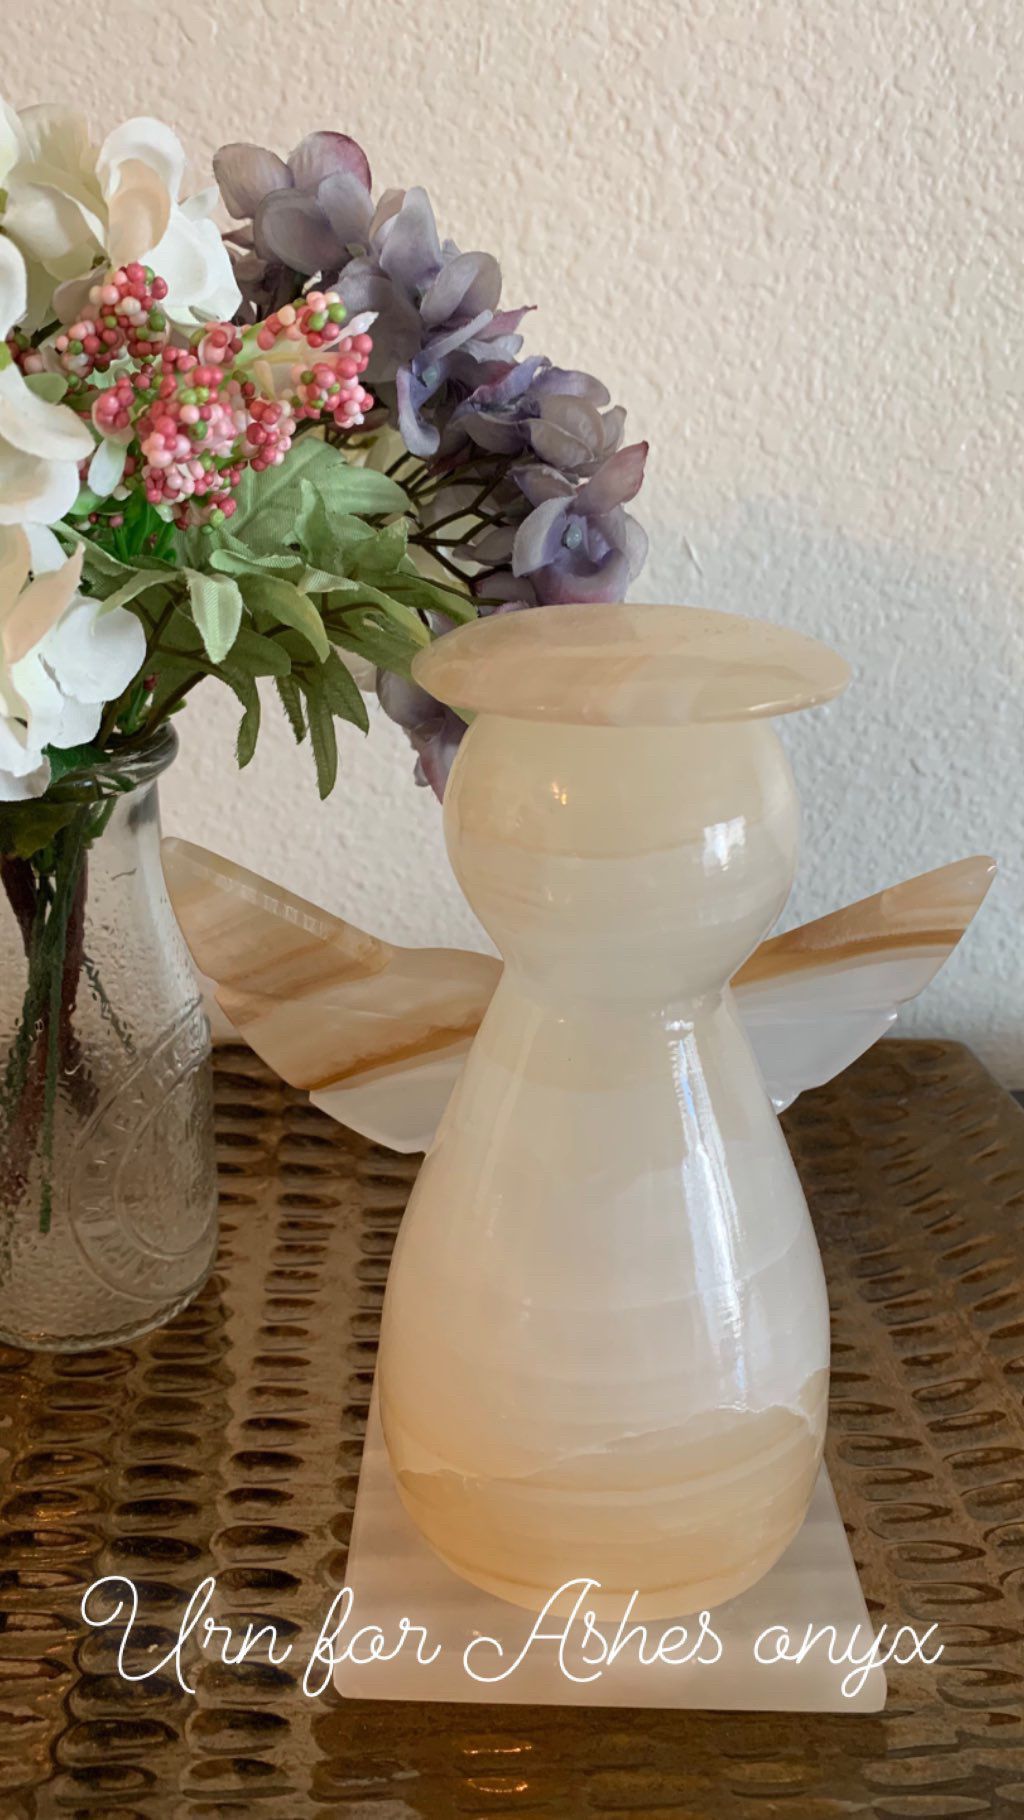 Onyx White Angel Cremation Urn for ashes!